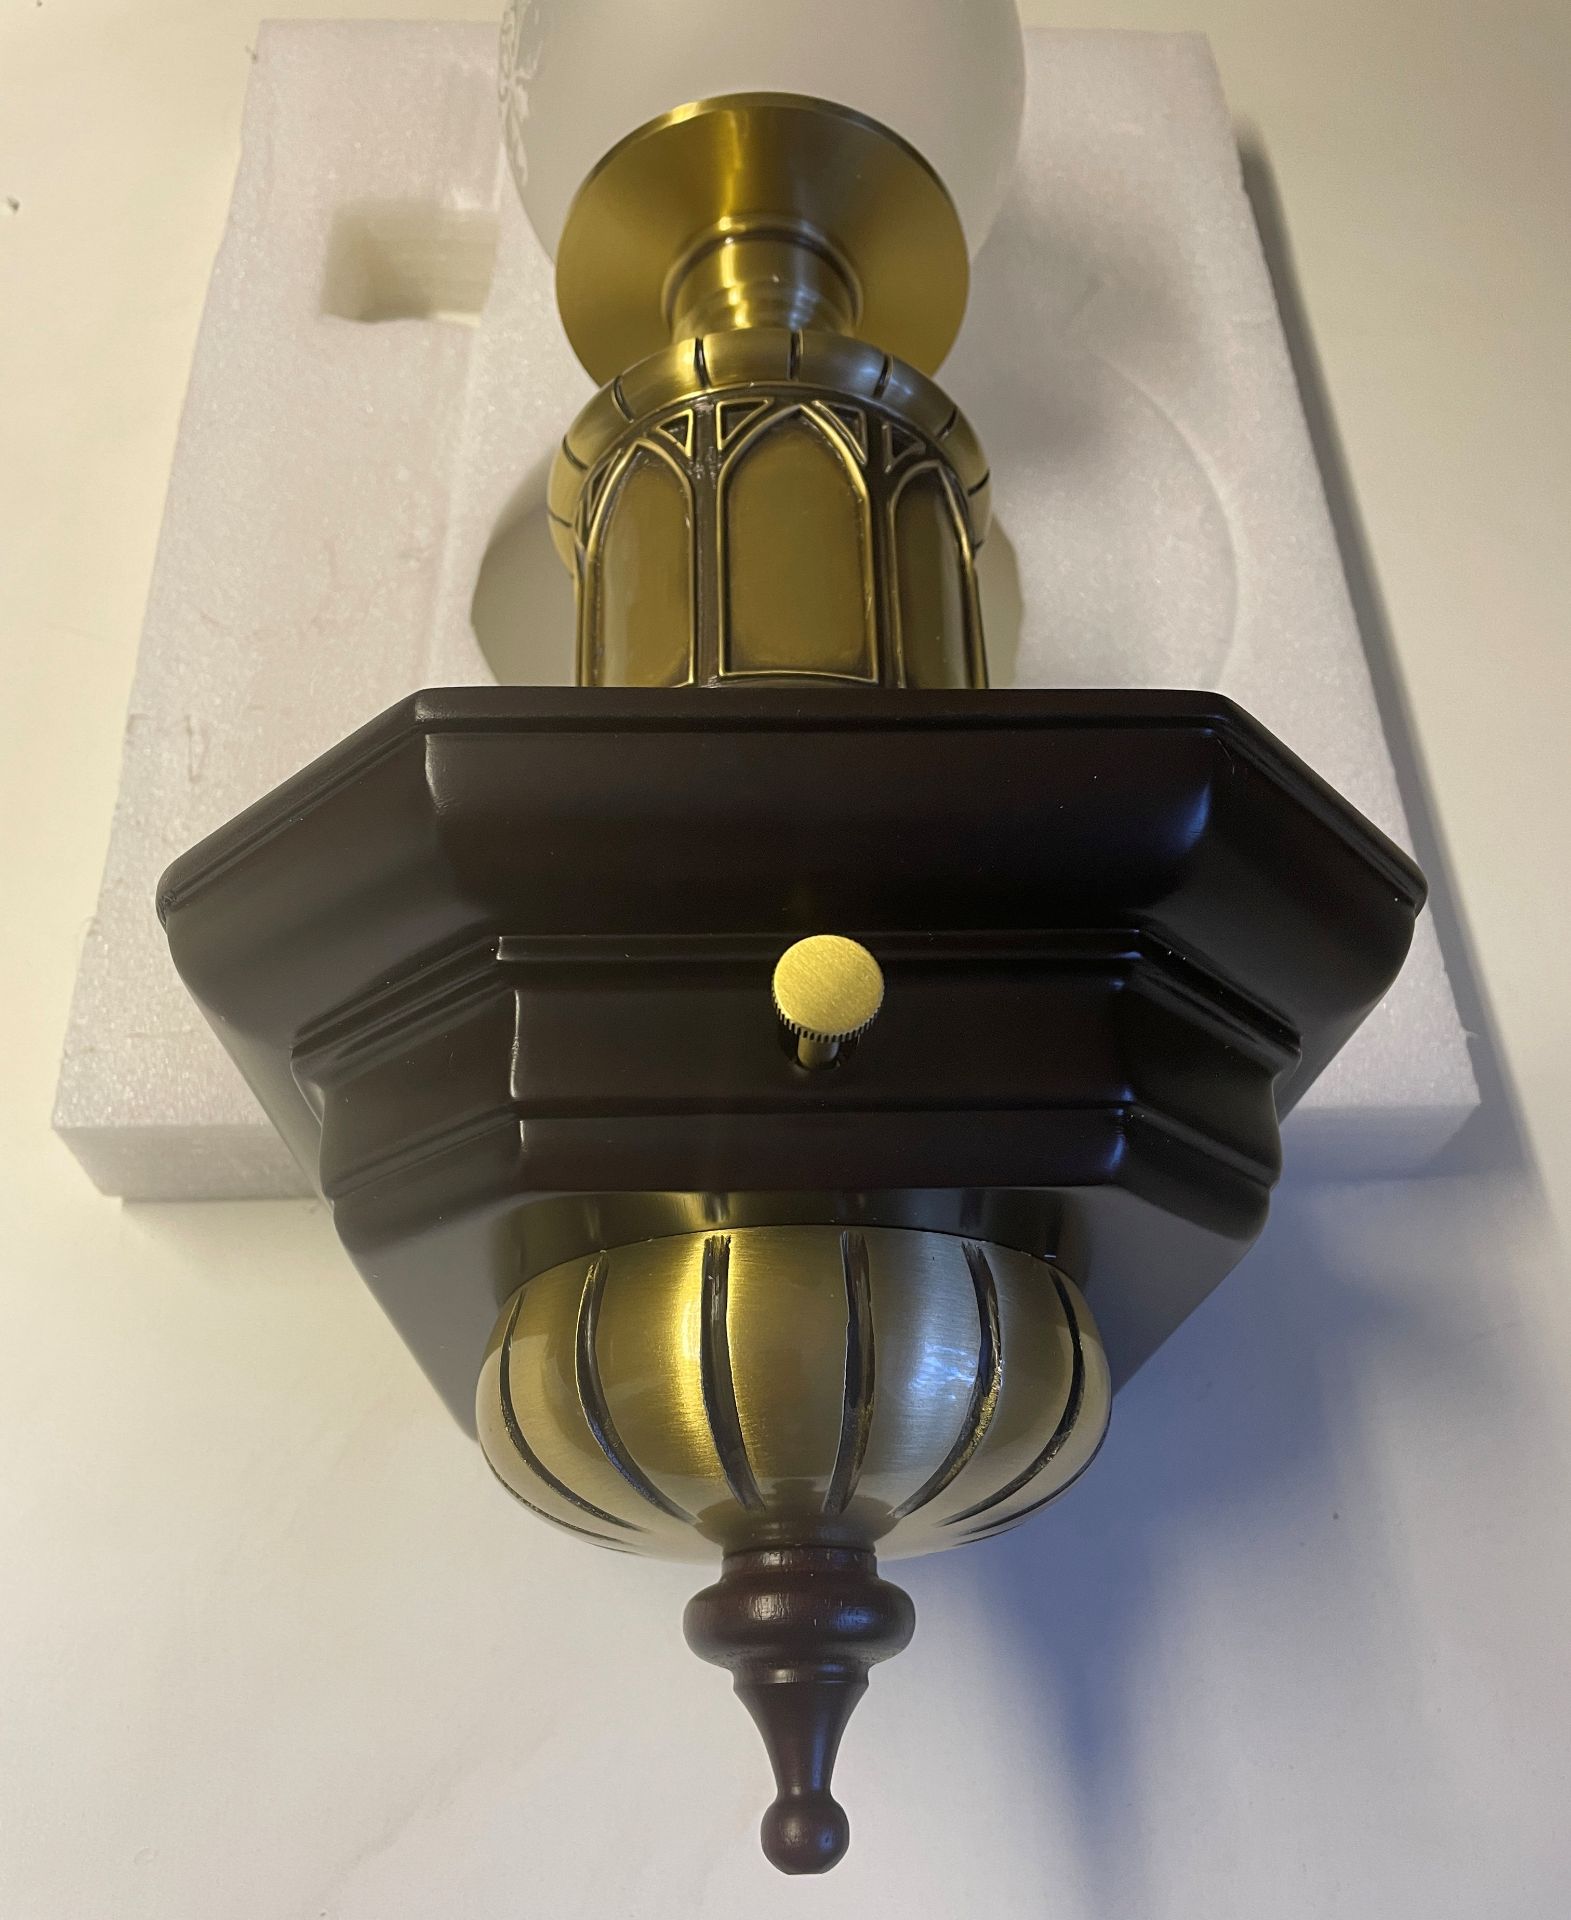 1 x Chelsom Substantial Wall Feature Light with dimmer switch and newall post style brass and glass - Image 14 of 18